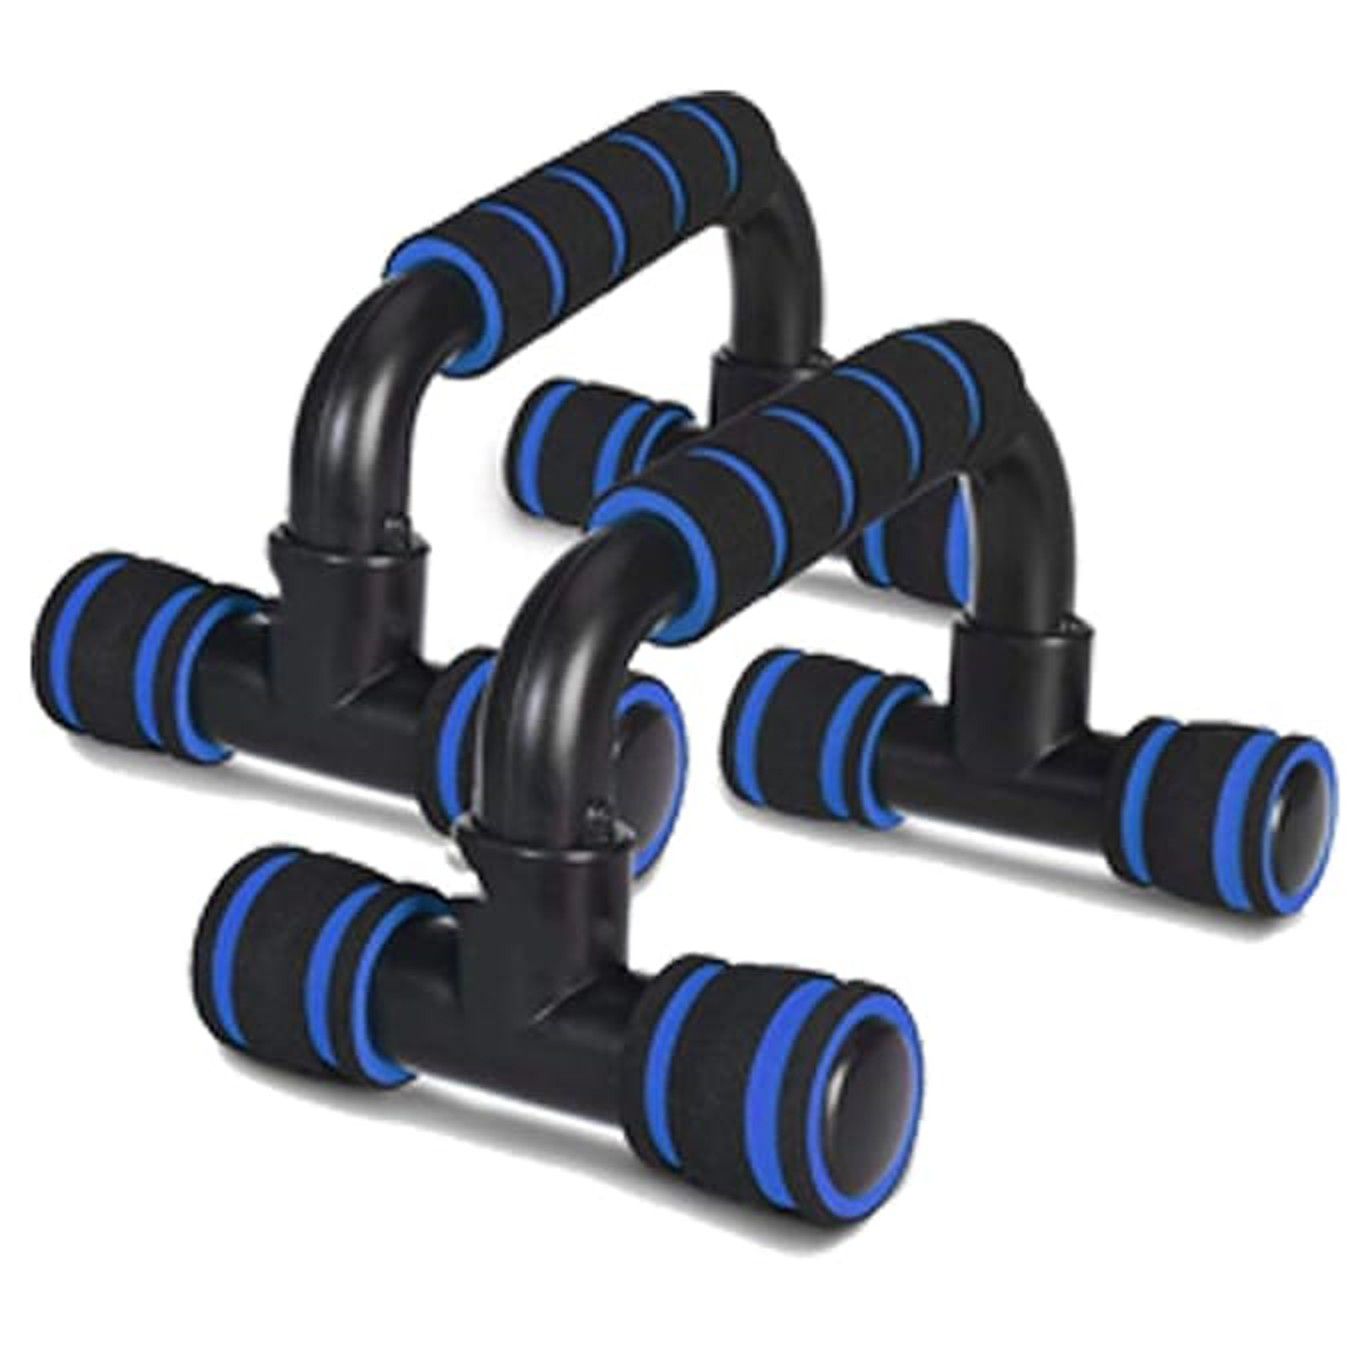     			VOLTEX Push Up Bar Stand For Gym & Home Exercise, Strengthens Muscles of Arms, Abdomen and Shoulders for men and women